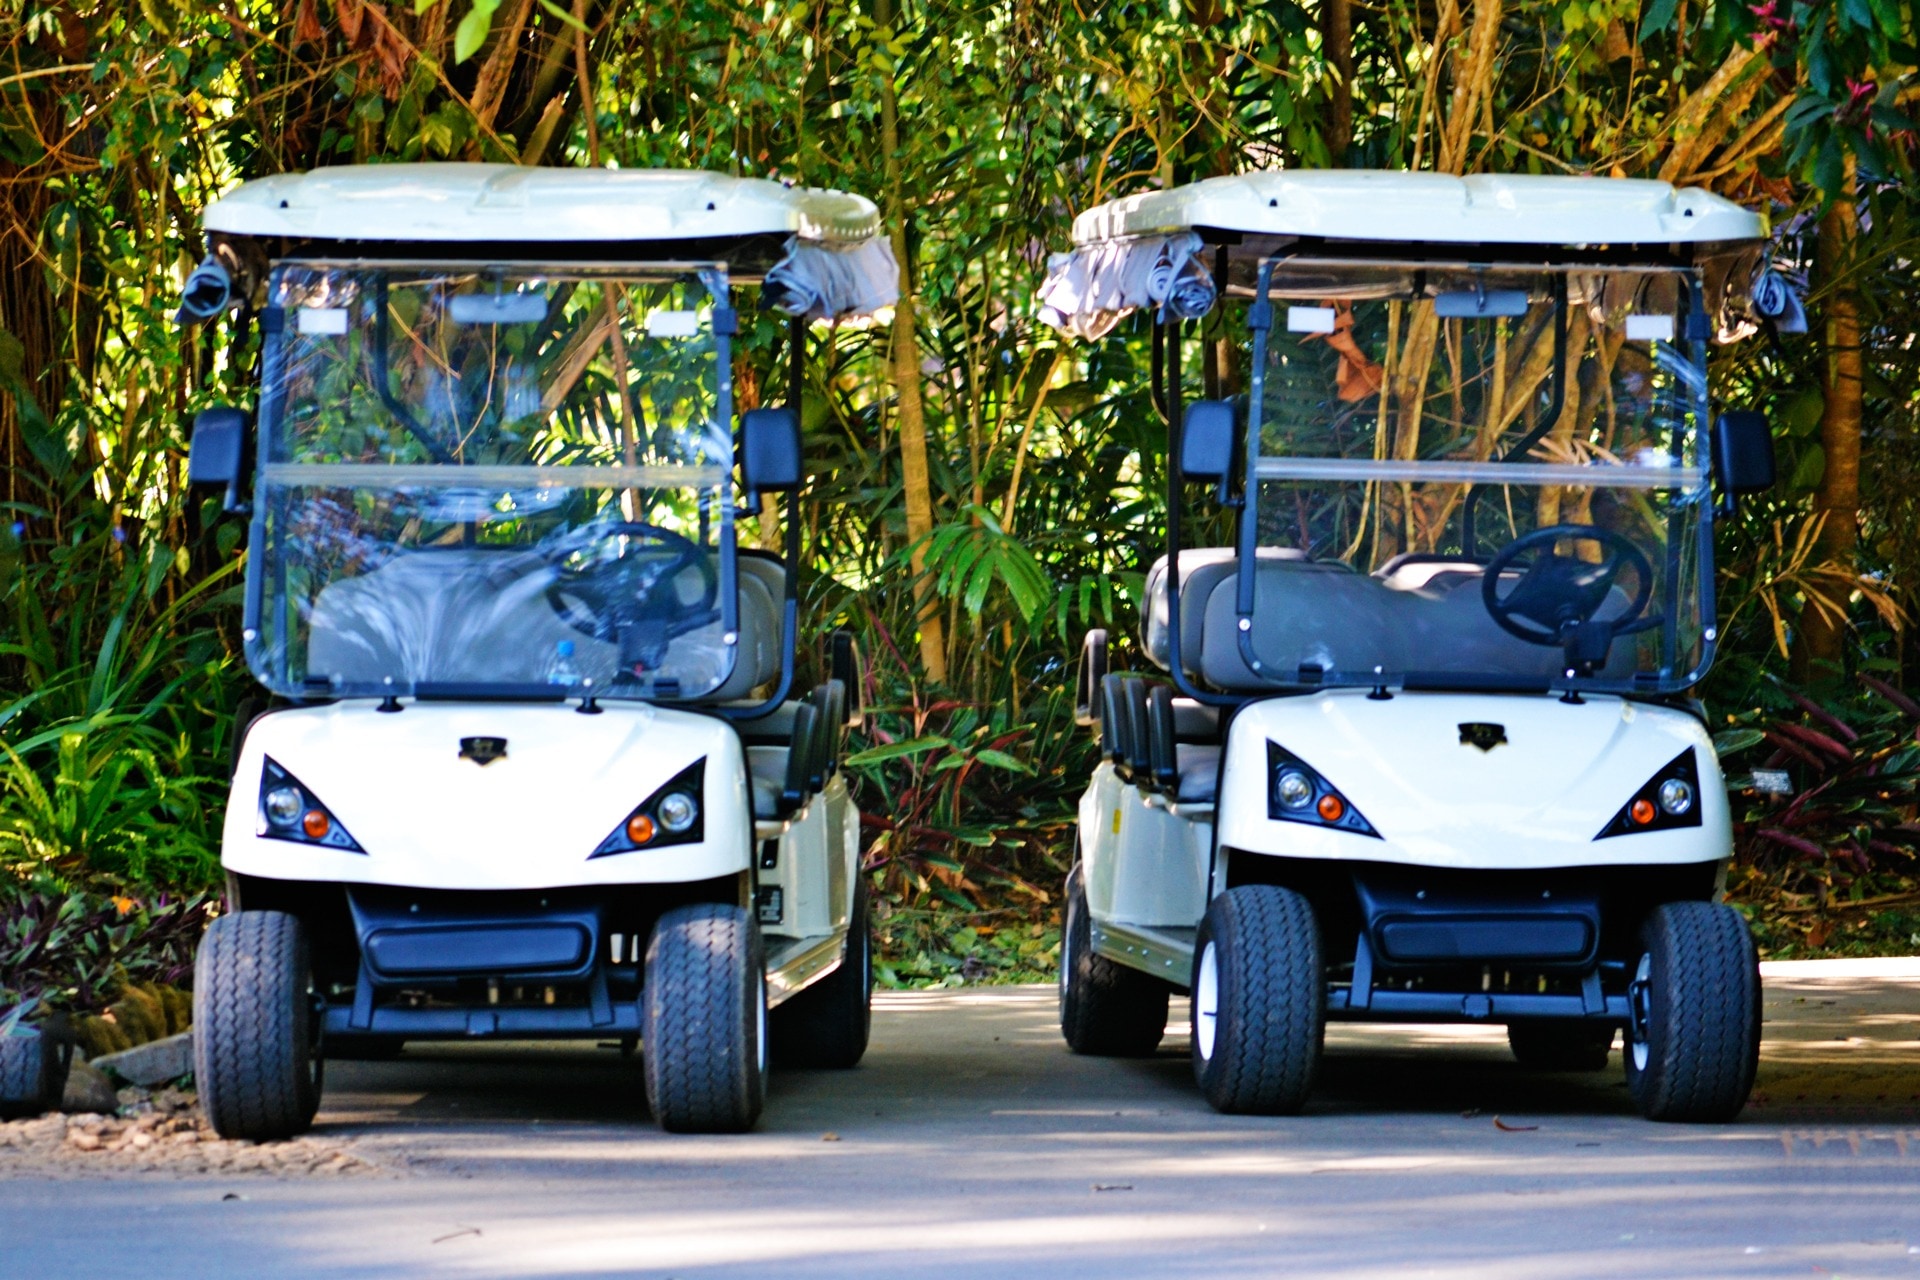 2 white golf cart on gray concrete road during daytime